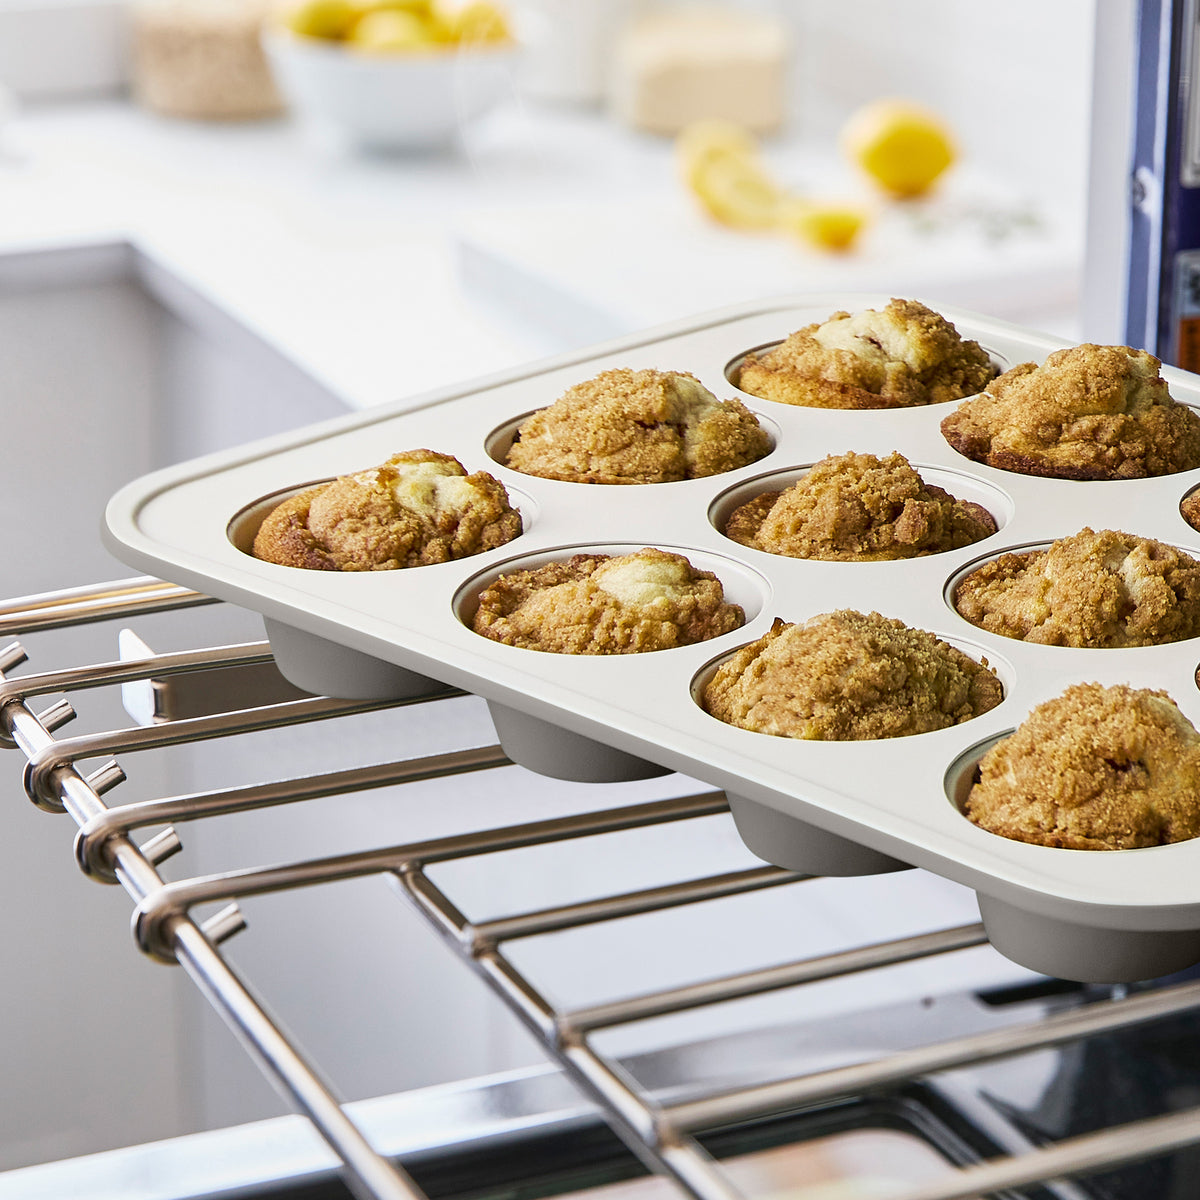 12-Cup Crown Muffin Pan